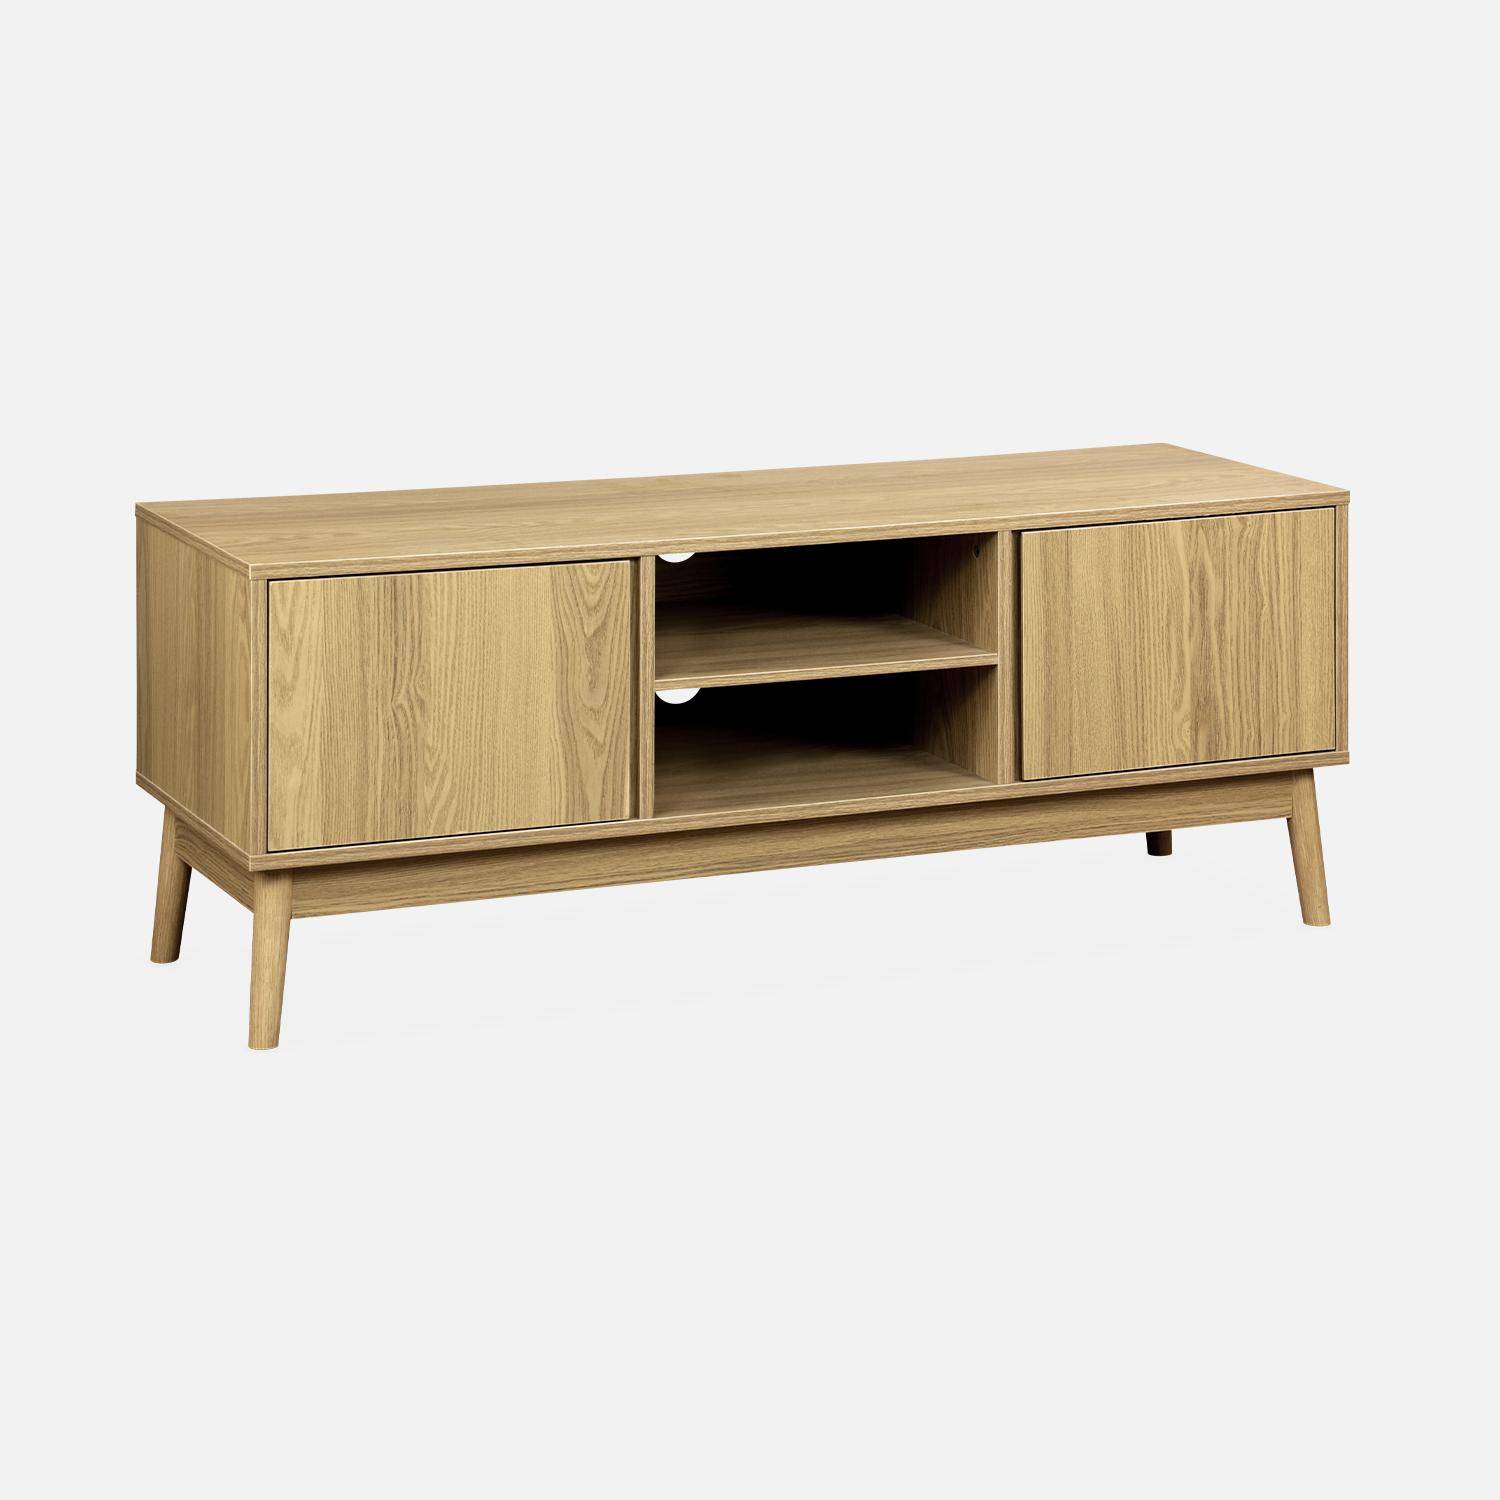 TV stand with 2 doors and 2 storage nooks, 120x39x48cm - Dune - Natural wood Photo3